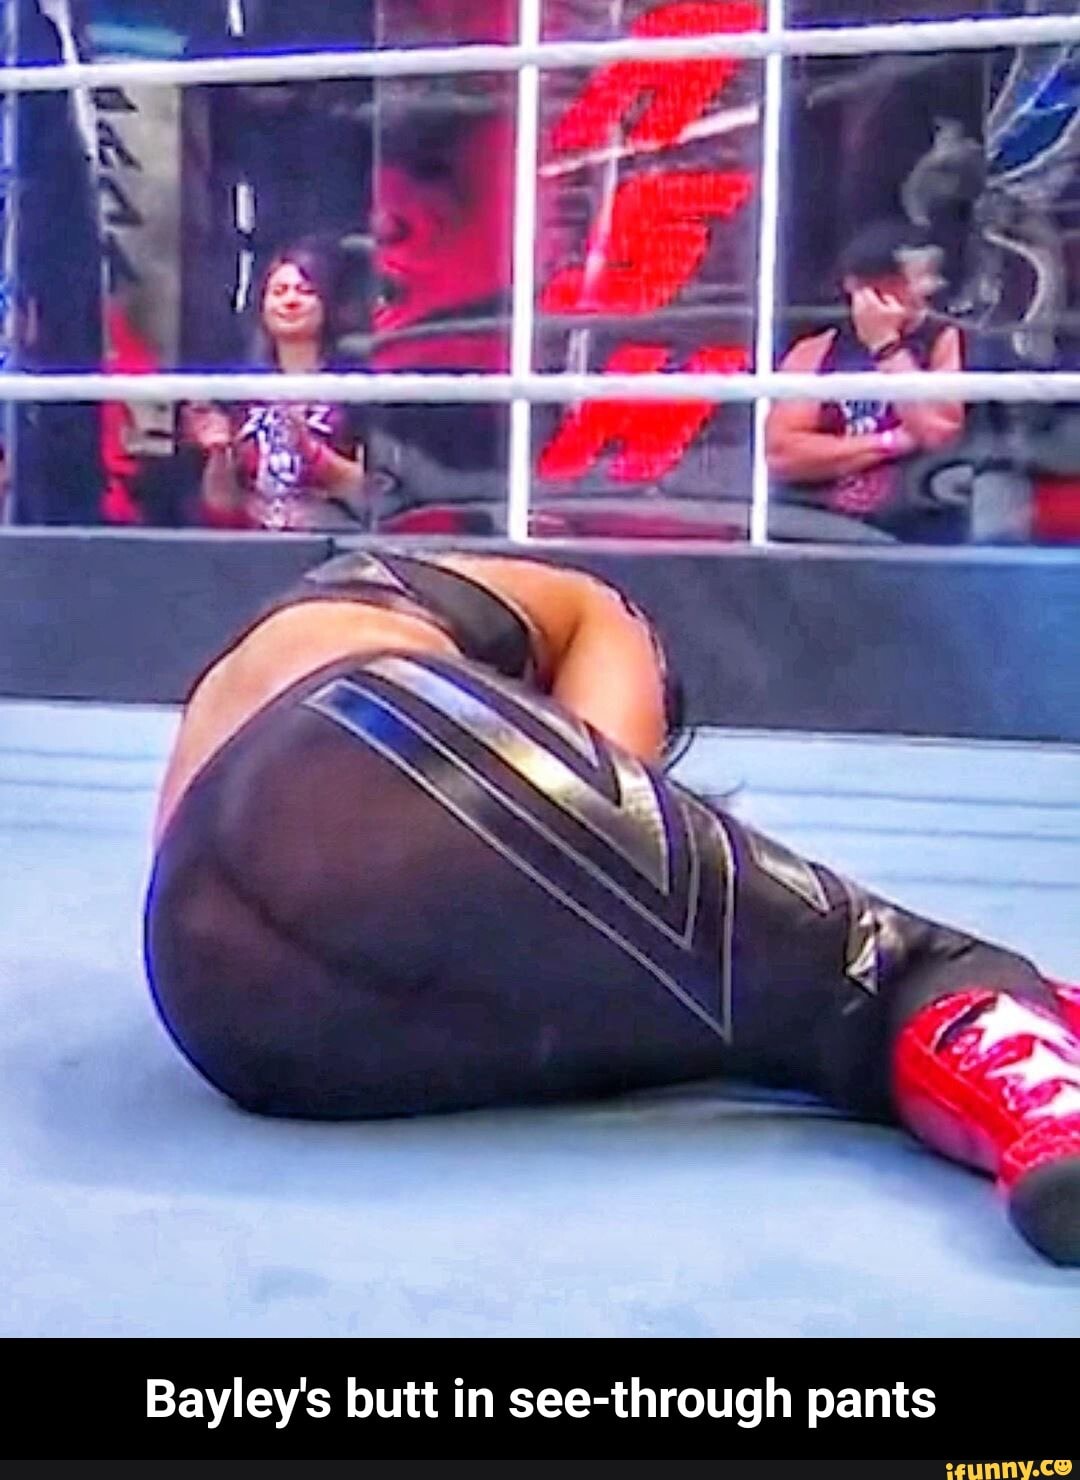 Bayley's butt in see-through pants - Bayley's butt in see-through...